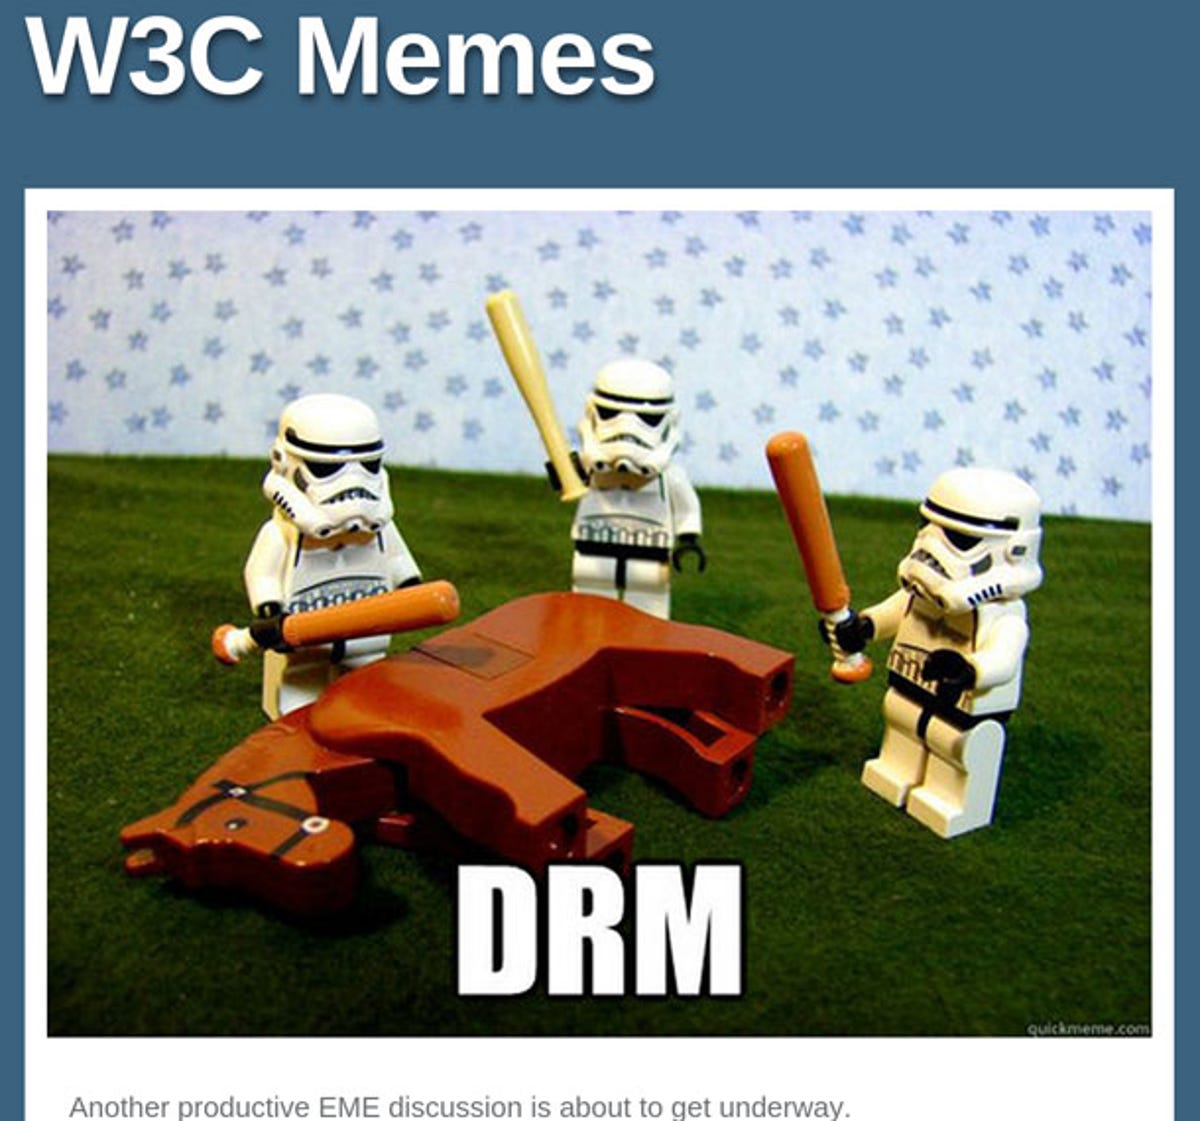 The W3C Memes blog has made fun of the Web standards group's efforts to deal with DRM and Web video.